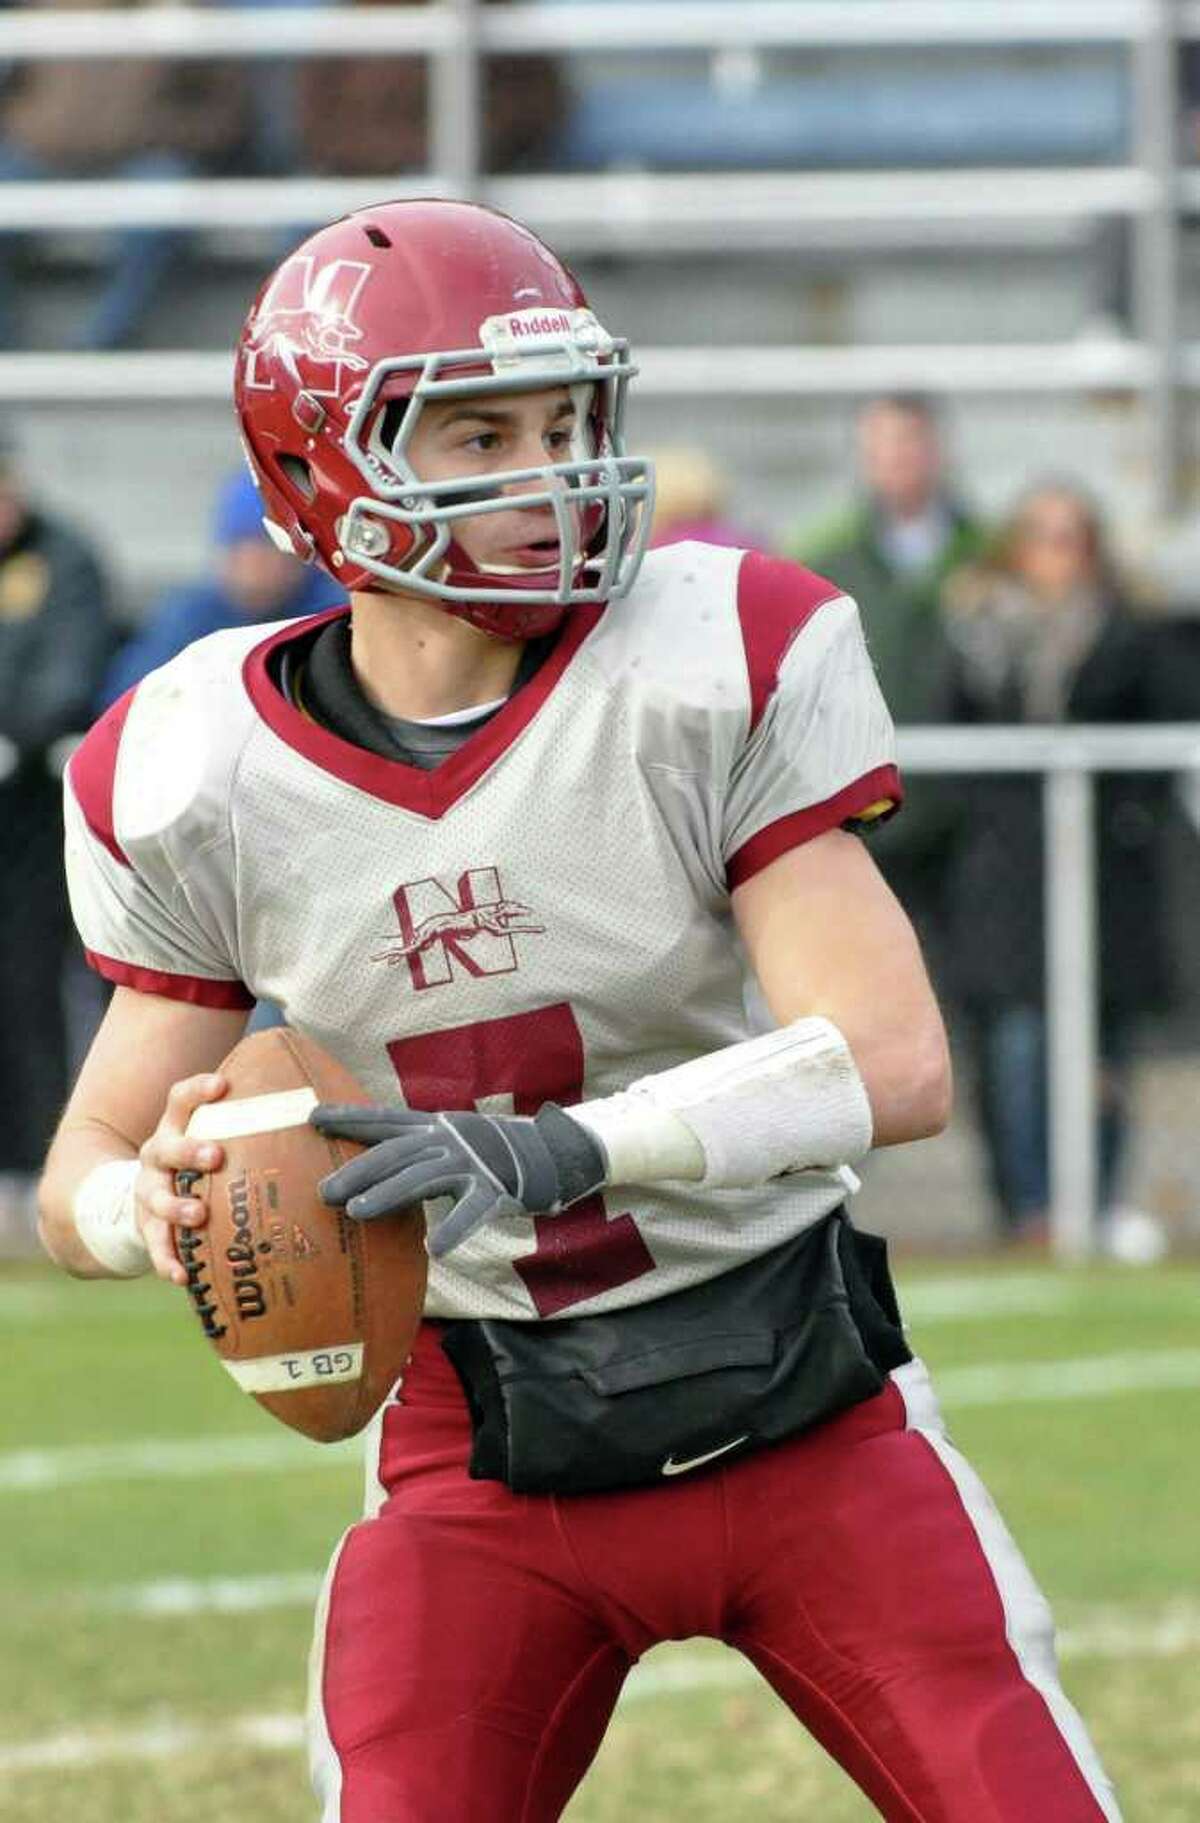 Naugatuck's Erich Broadrick throws a pass during the Thanksgiving day football game against Ansonia at Jarvis Field at the Nolan Athletic Complex in Ansonia on Thursday, Nov. 25, 2010.